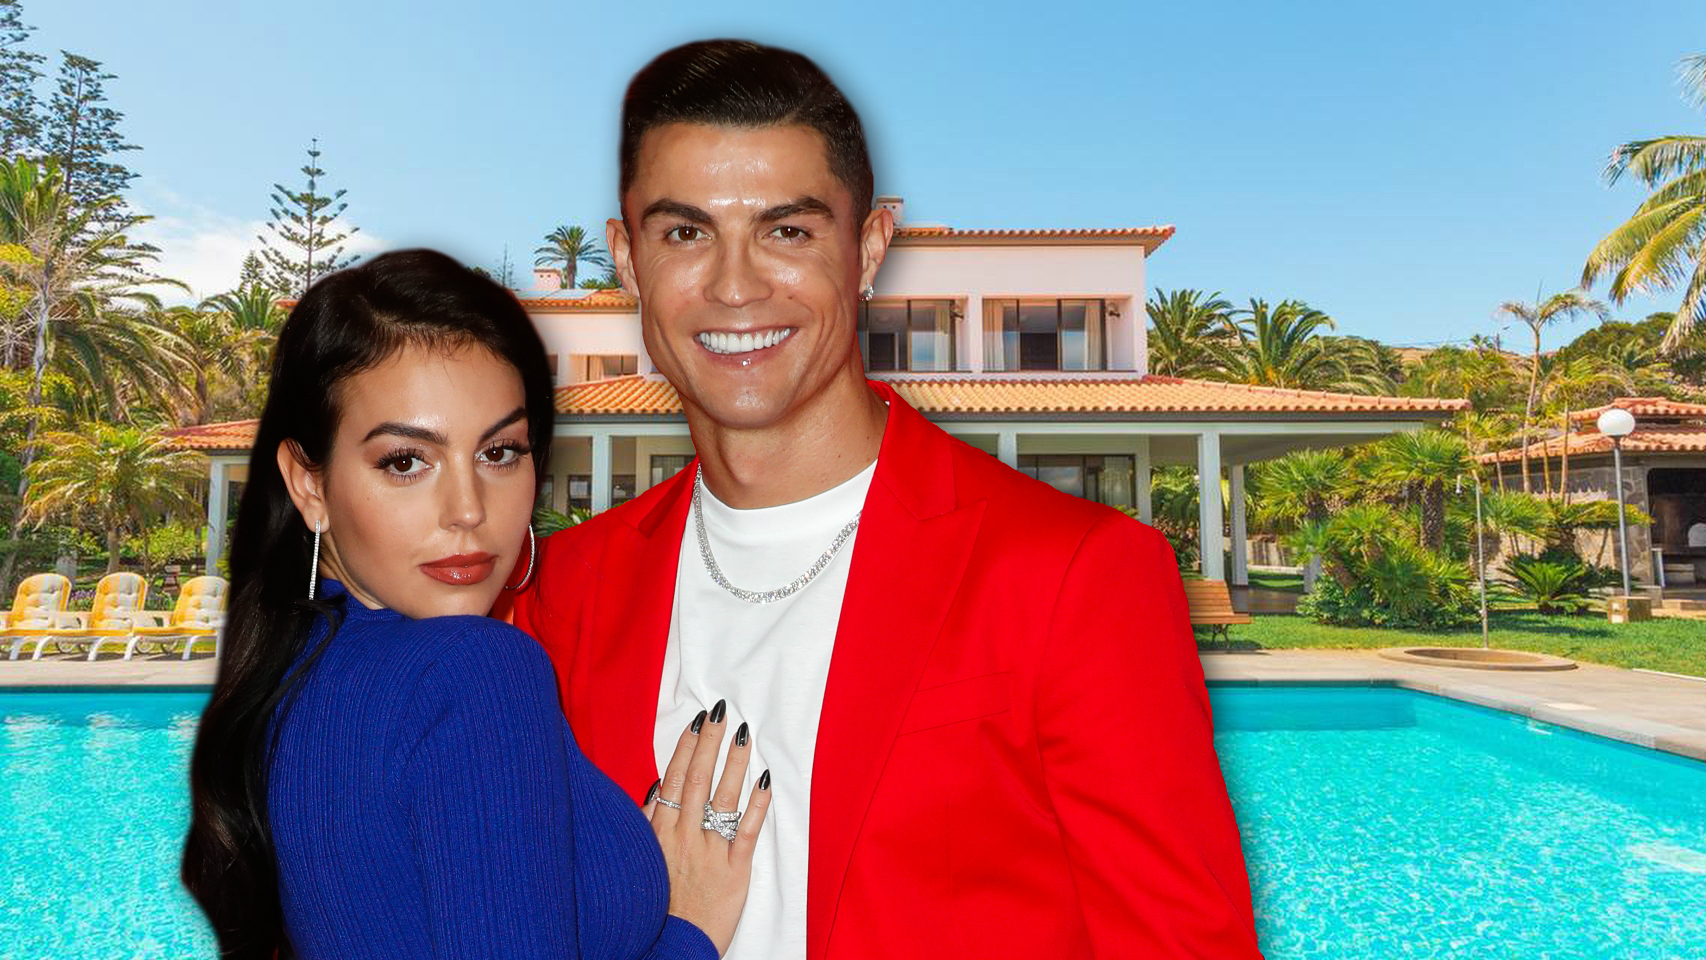 Georgina Rodriguez said “Yes” to Cristiano in a lush red dress